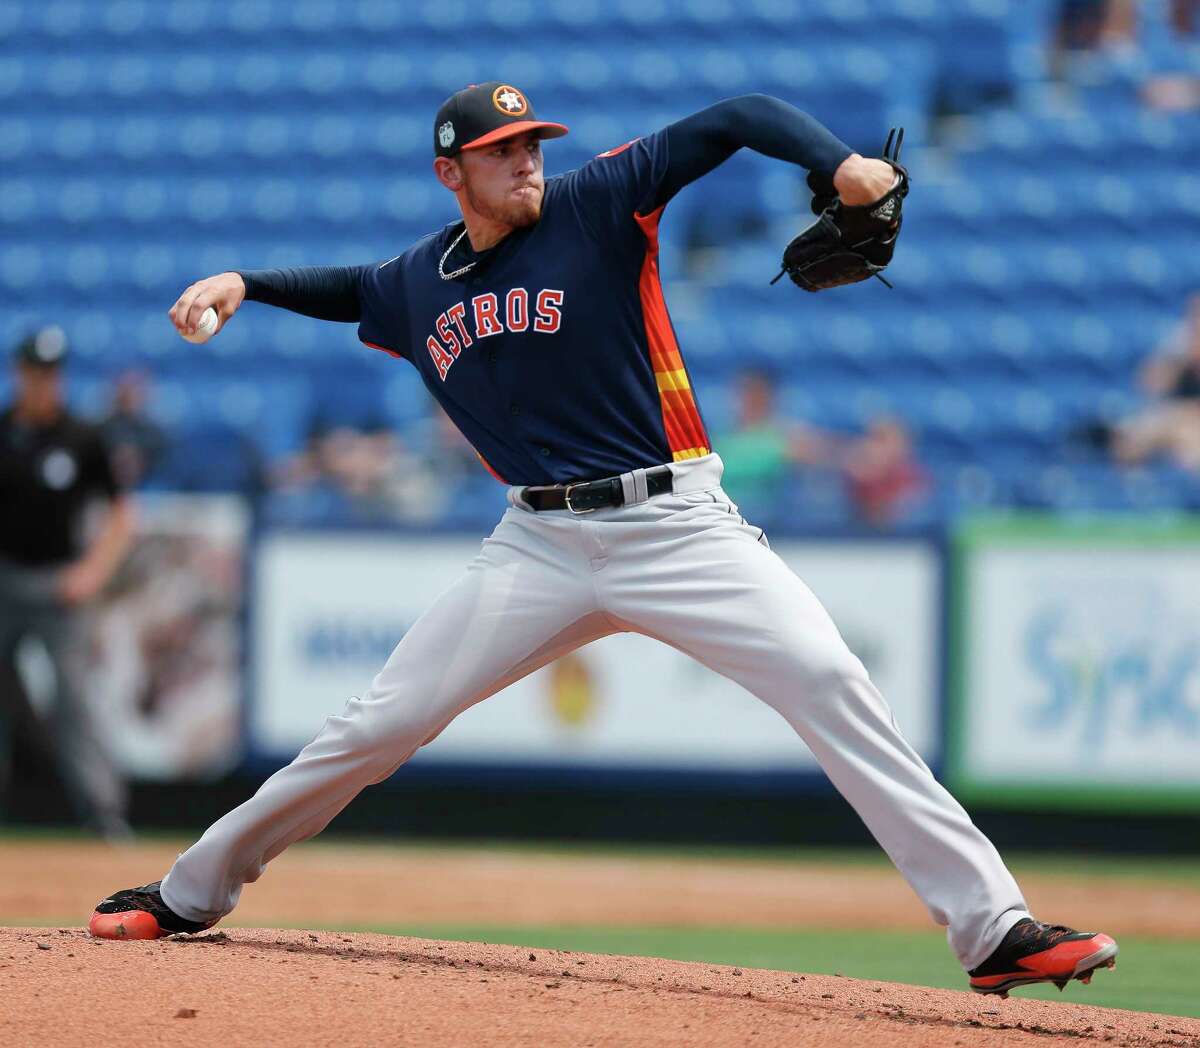 Houston Astros starting pitcher Joe Musgrove (59) works in the first inning of a spring training baseball game against the New York Mets Monday, Feb. 27, 2017 in Port St. Lucie, Fla. (AP Photo/John Bazemore)